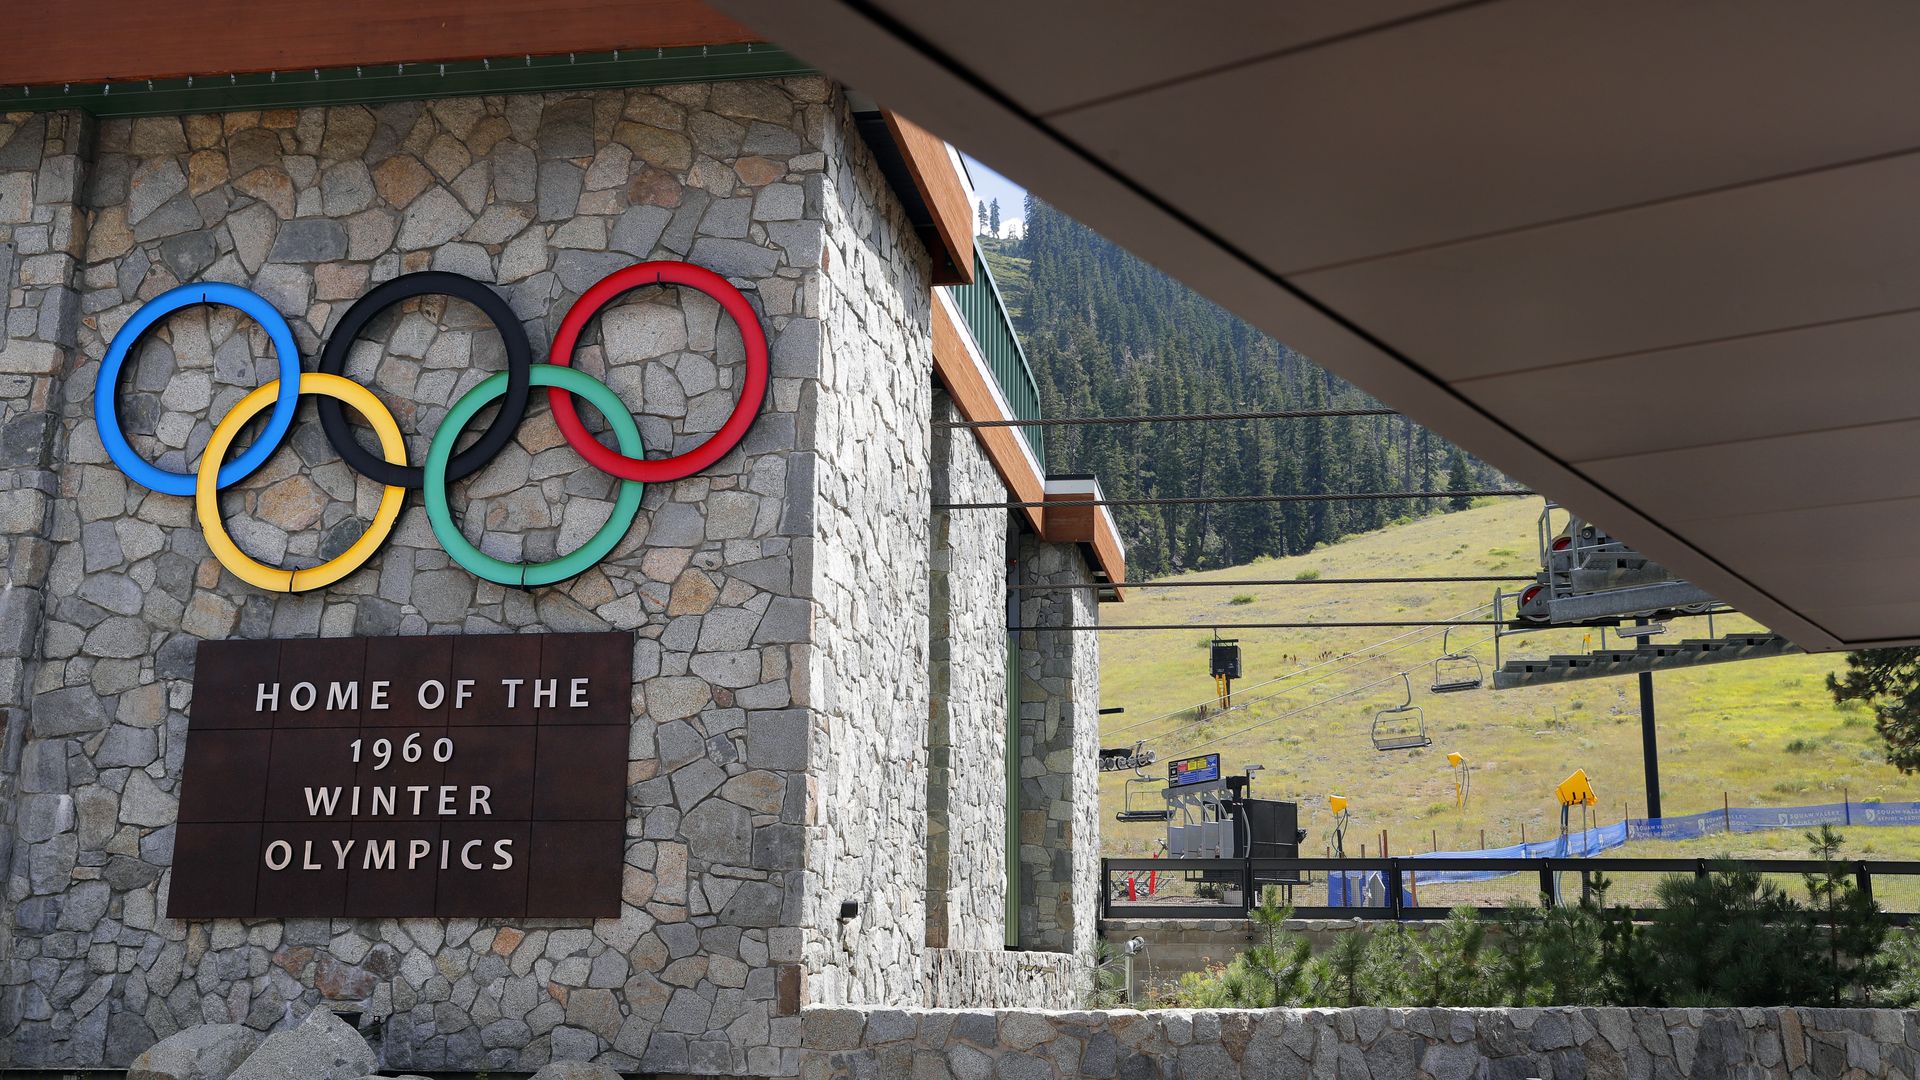 Photo of a ski resort's roller coaster lift with the Olympic rings emblazoned on the building and a sign that says "Home of the 1960 Winter Olympics"